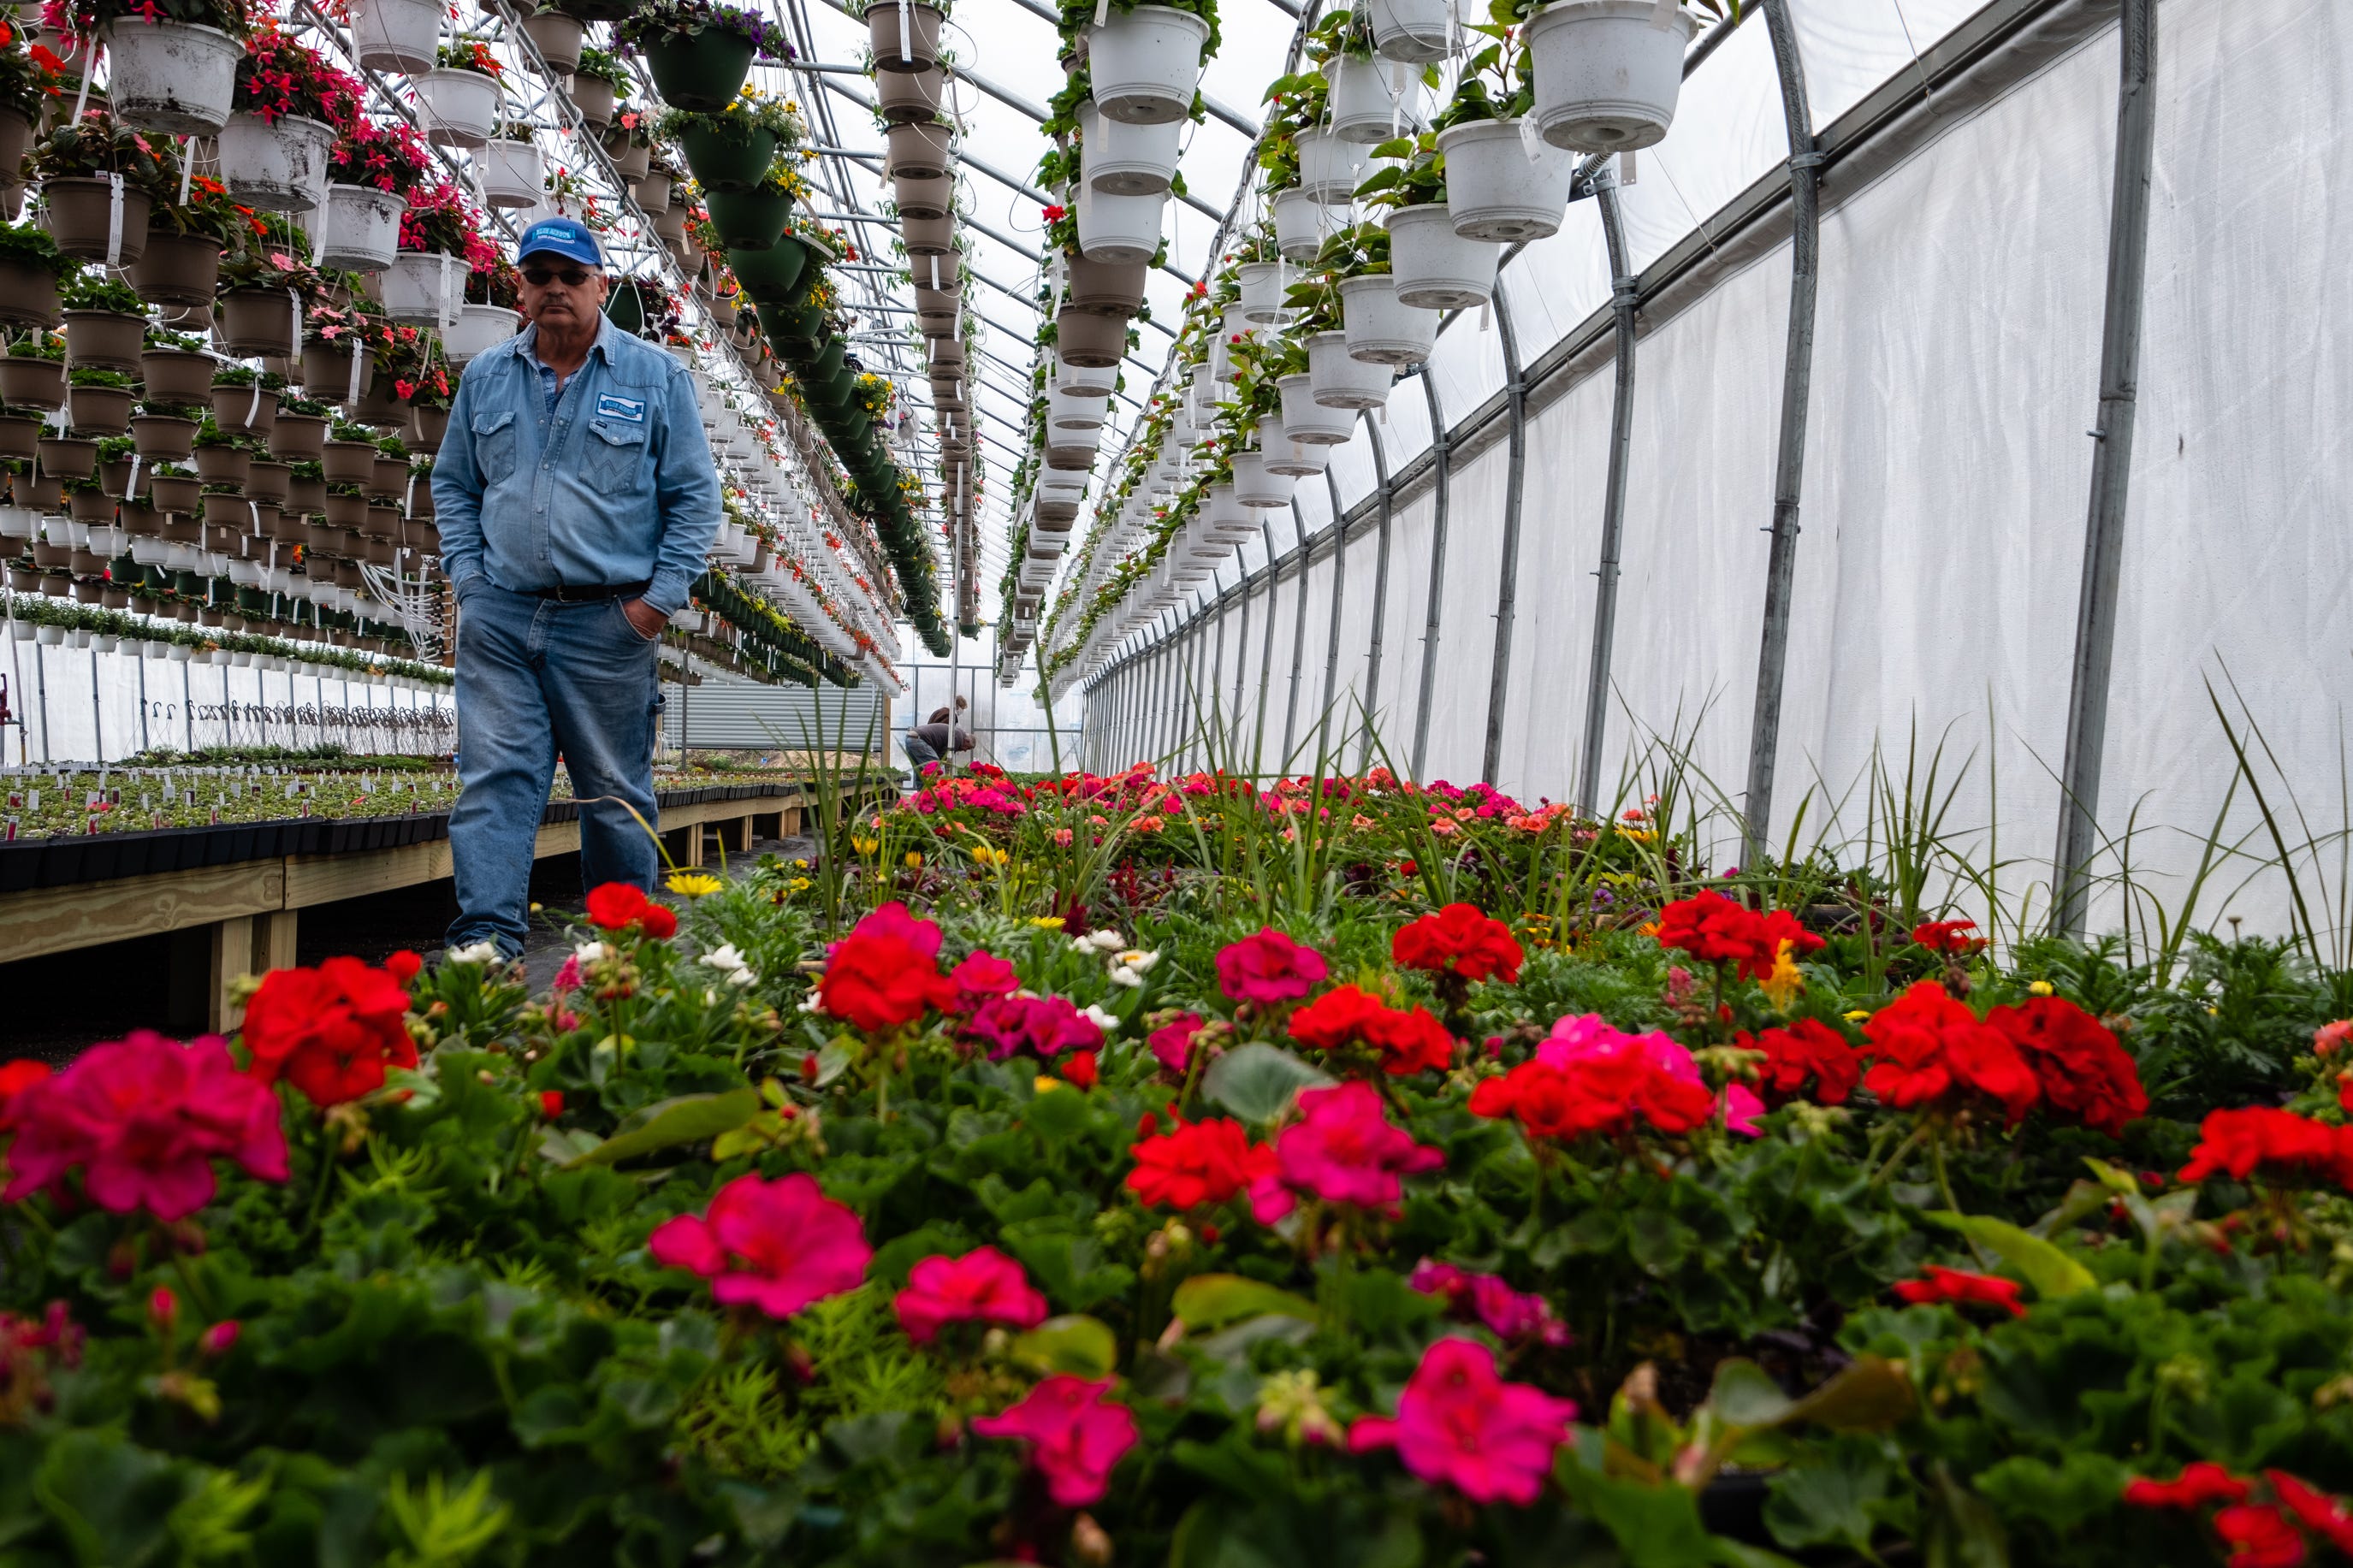 Greenhouse Owners Welcome Revised Order Allowing Them To Reopen